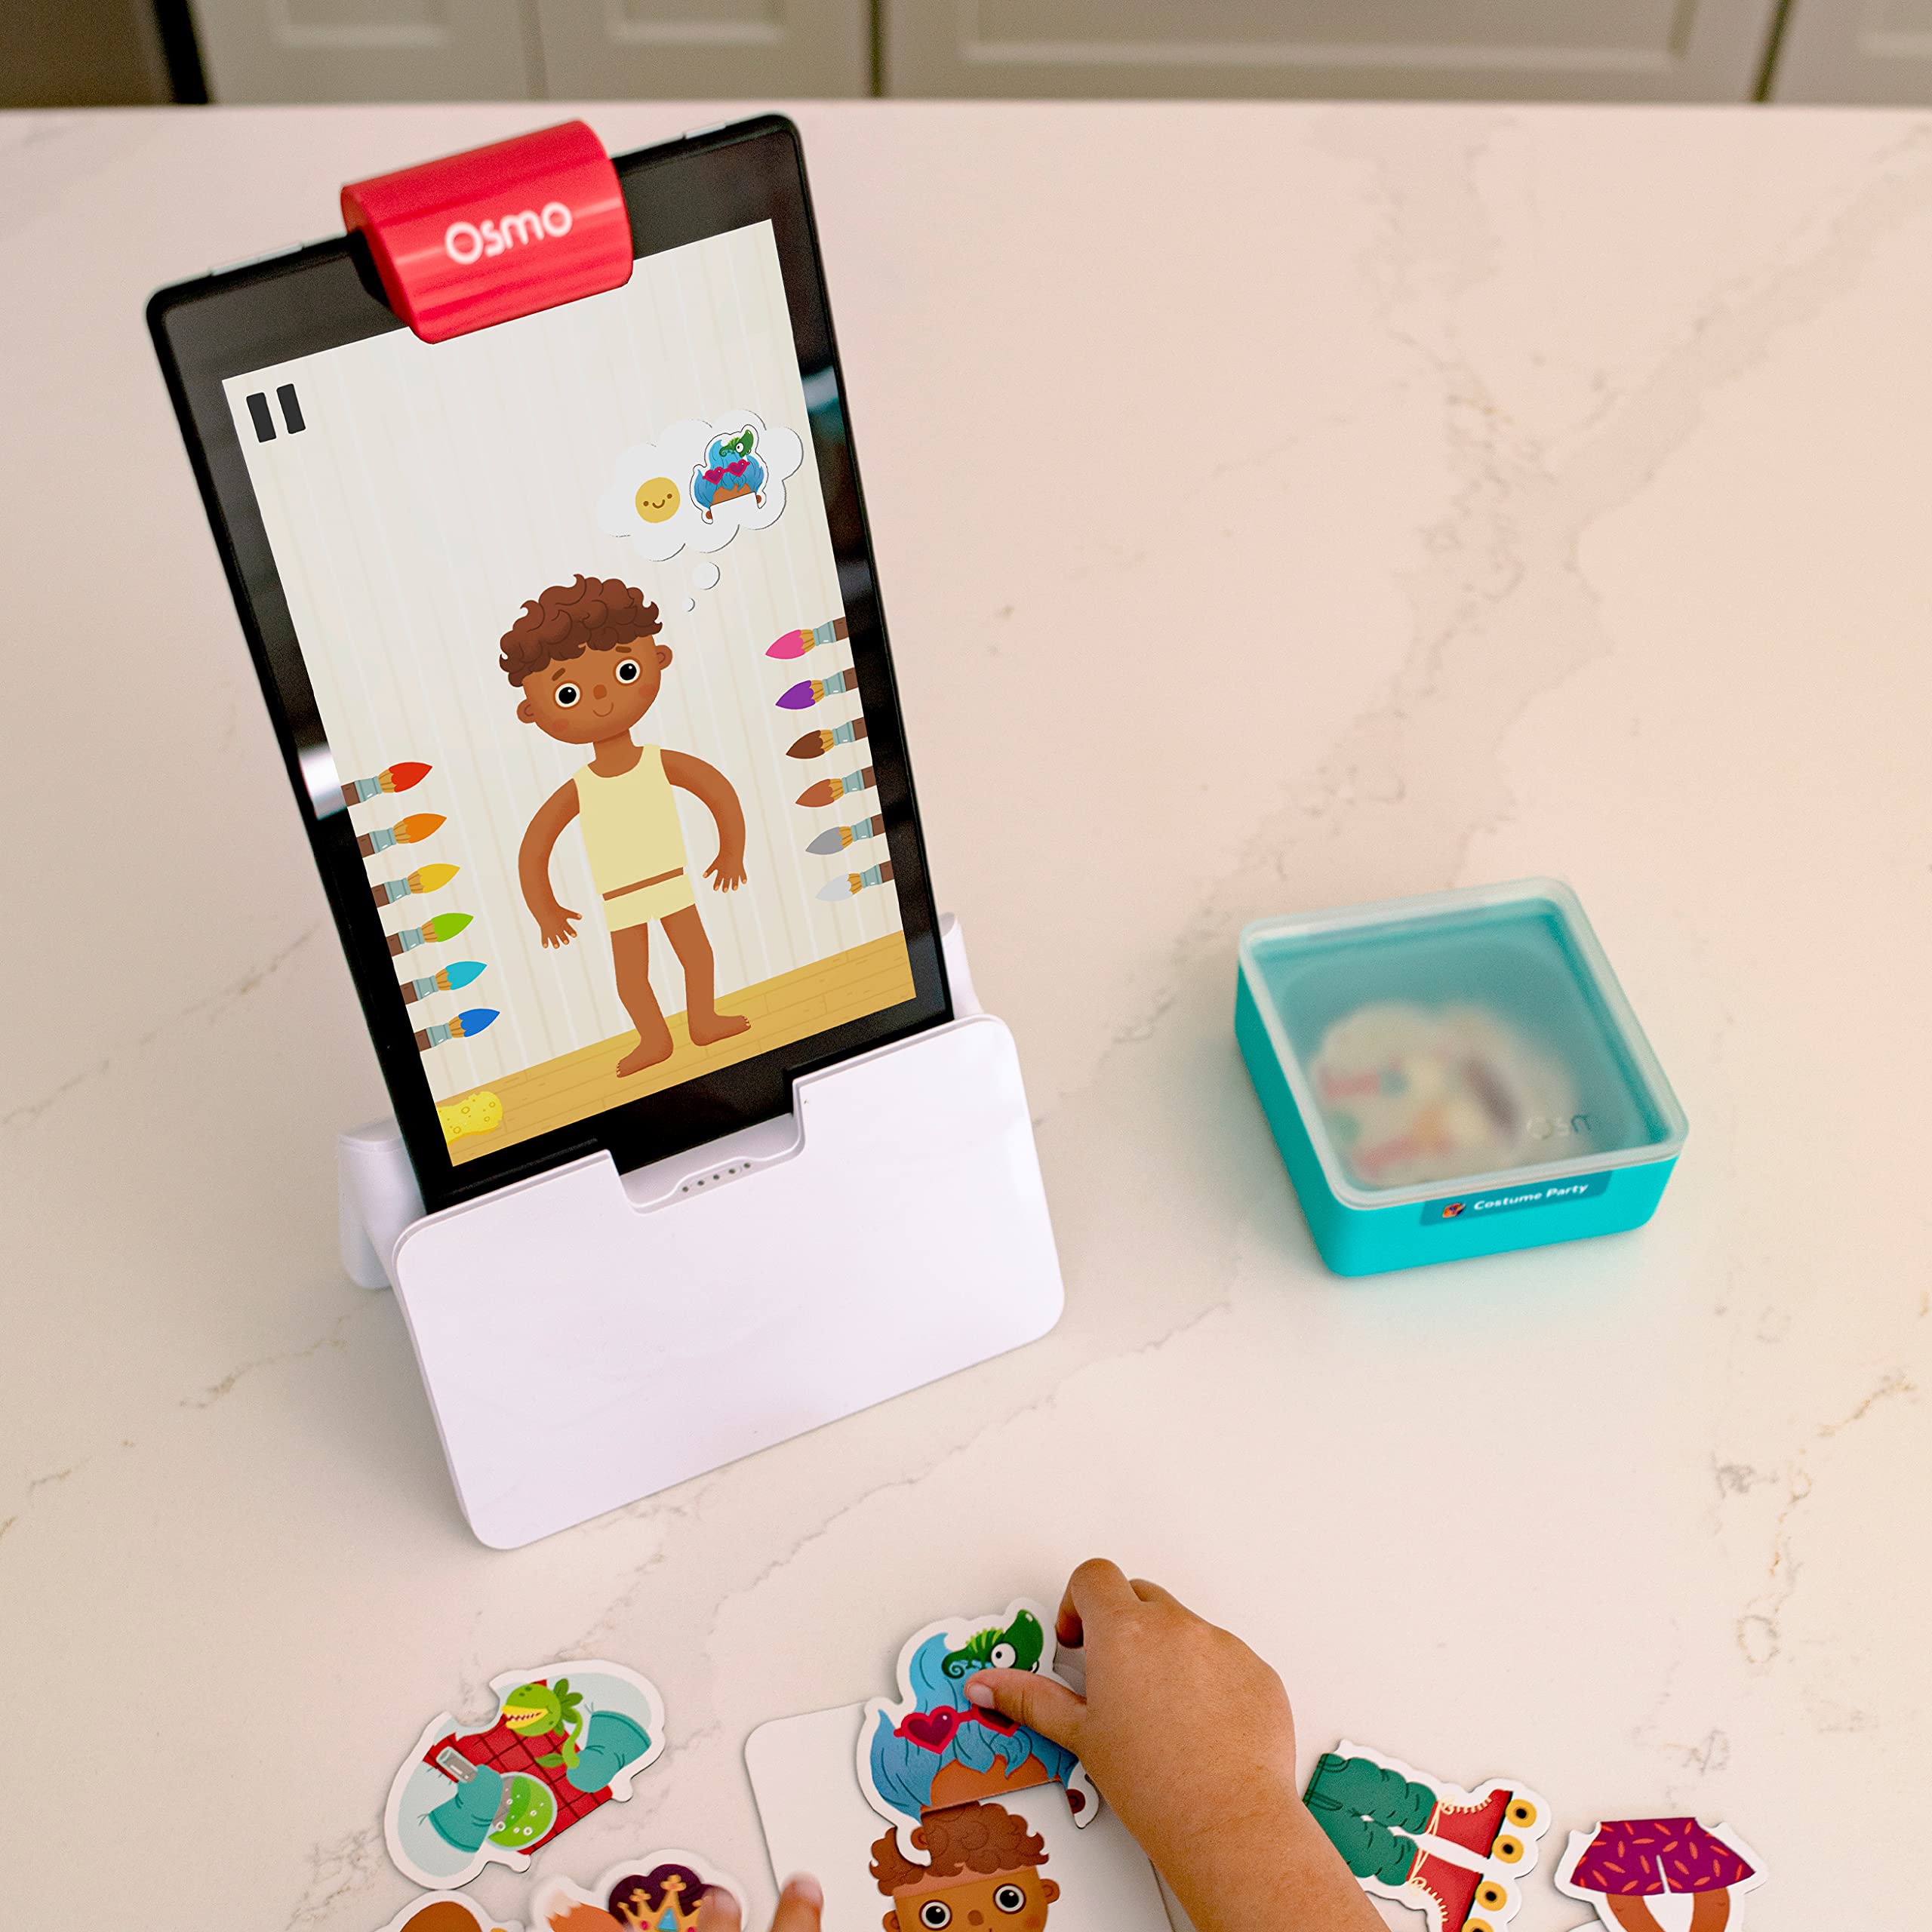 Osmo-Little Genius Starter Kit for Fire Tablet-4 Educational Learning Games-Preschool Ages 3-5-Phonics,Problem Solving & Creativity-STEM Toy Gifts,Kids(Osmo Fire Tablet Base Included)